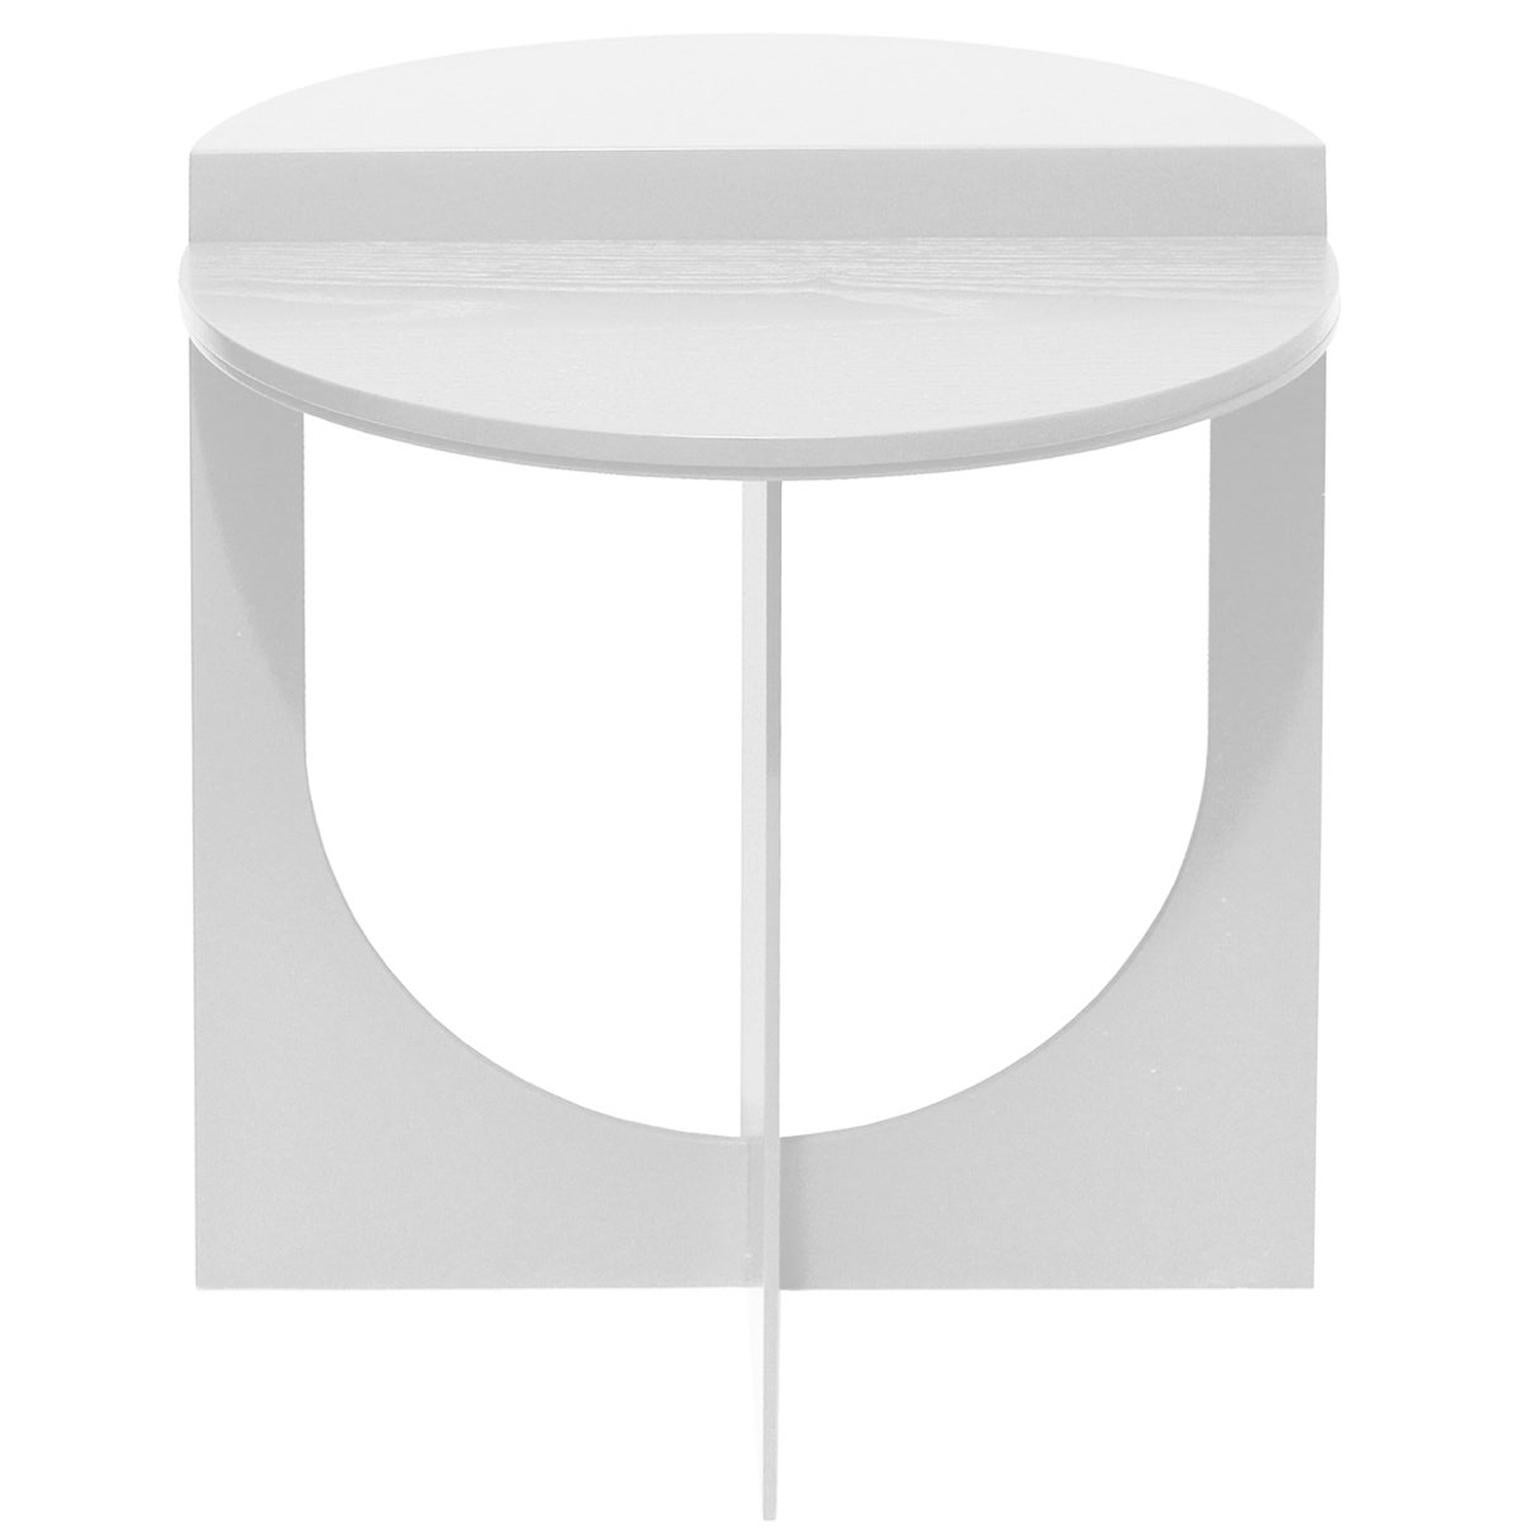 Plus, Colored, Steel, Sidetable, Modern, Minimal, 21st Century, Contemporary For Sale